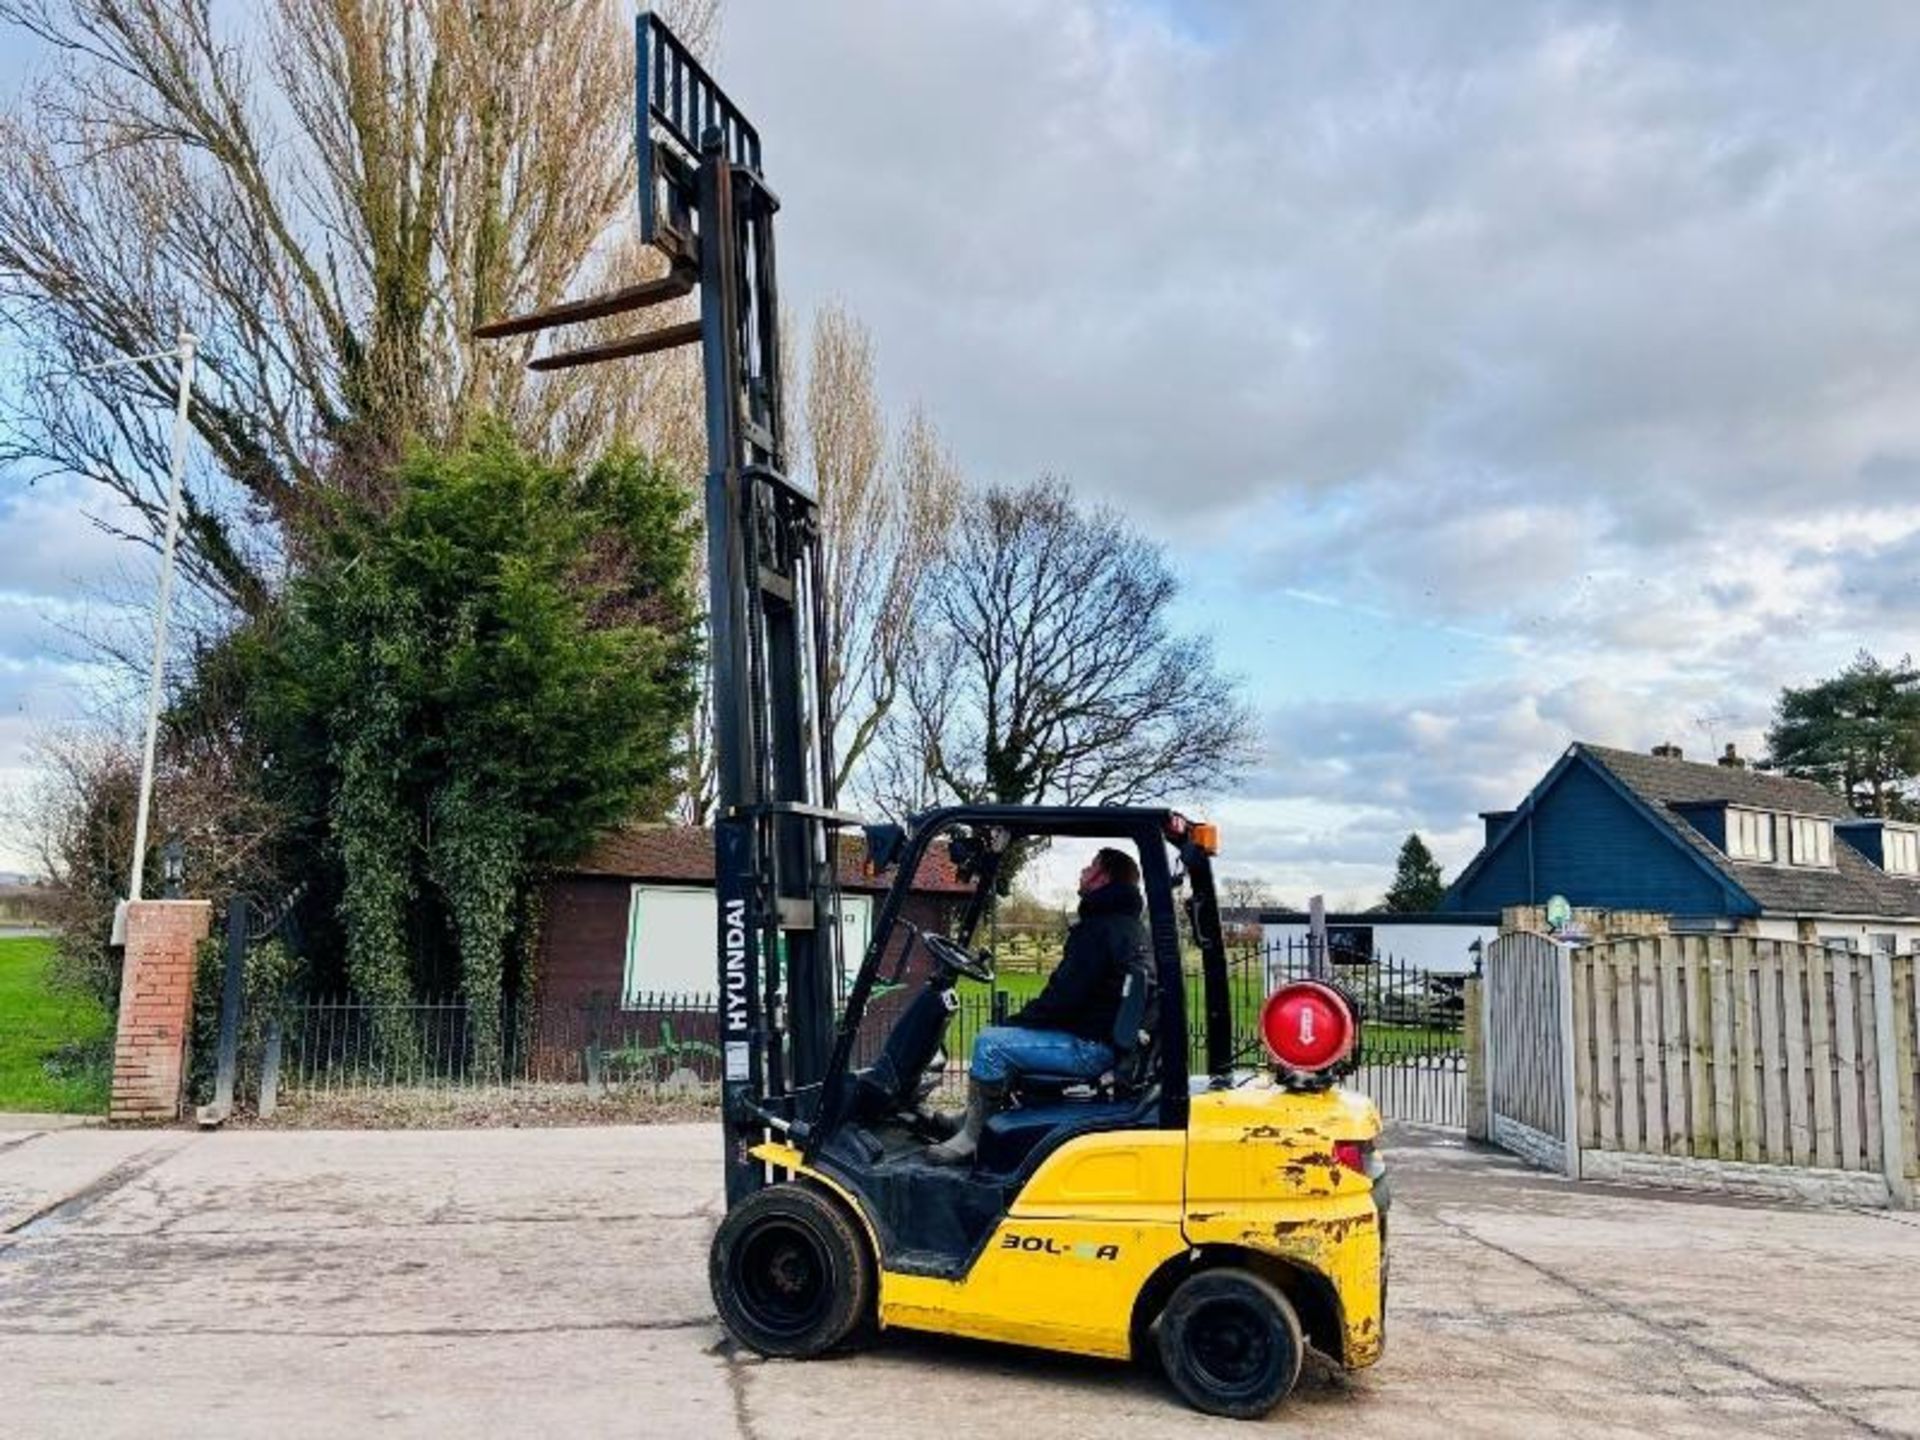 HYUNDAI 25L-9A CONTAINER SPEC FORKLIFT *YEAR 2017, 2956 HOURS* C/W SIDE SHIFT - Image 6 of 16